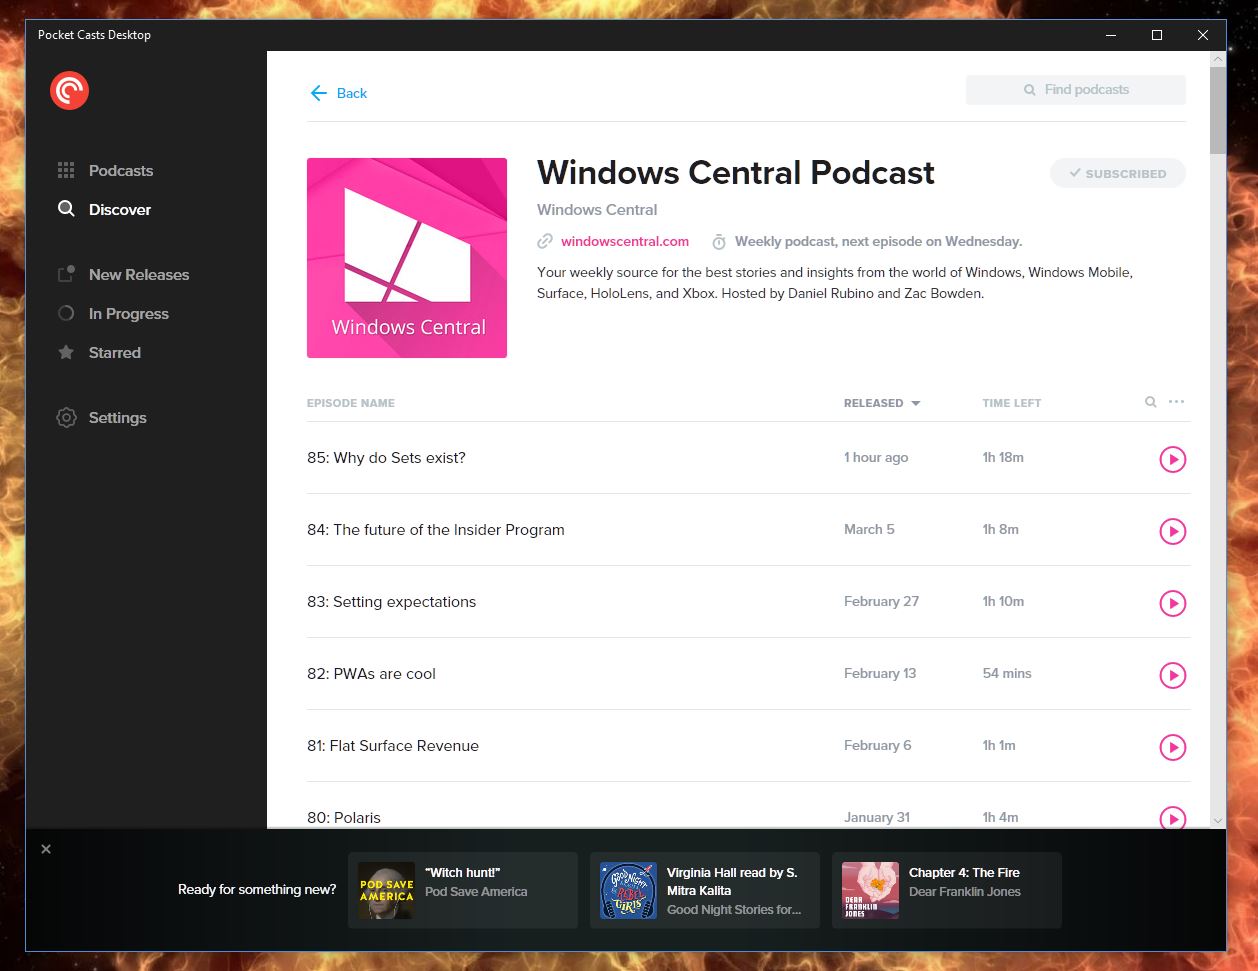 Pocket Casts hits the Microsoft Store for Windows 10